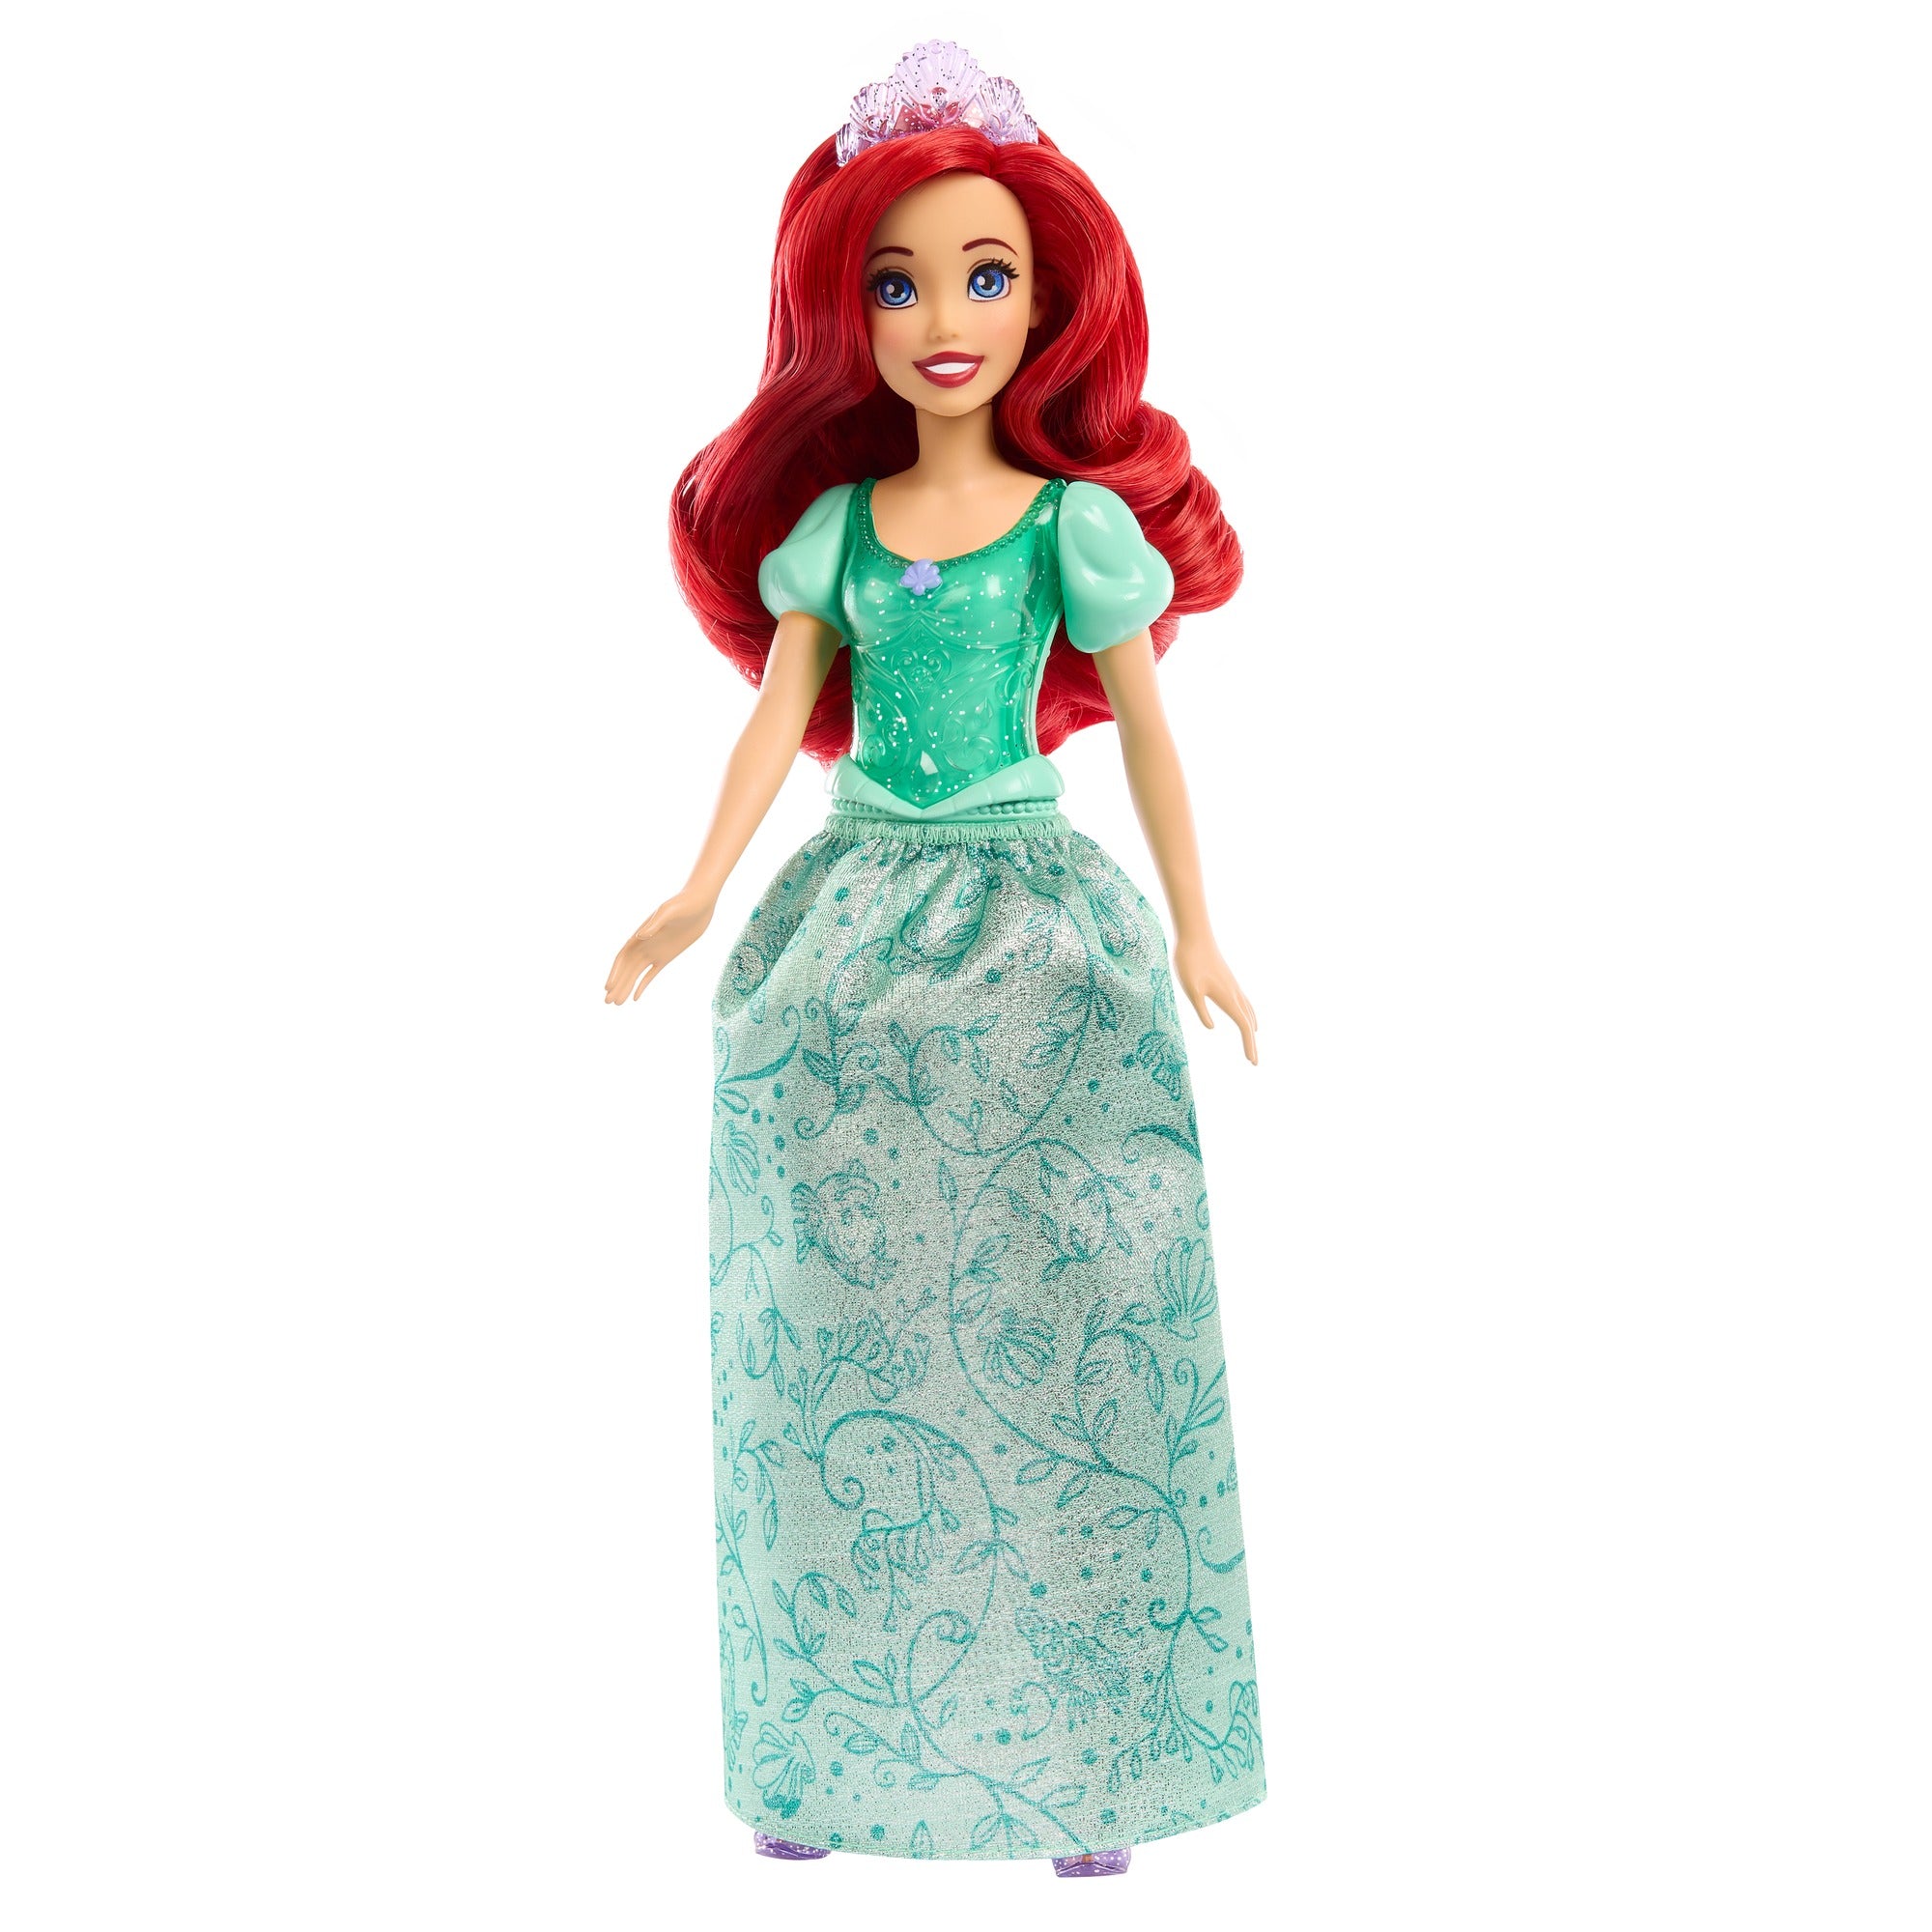 Disney Princess Ariel Posable Fashion Doll with Sparkling Clothing and Accessories for Kids Ages 3+